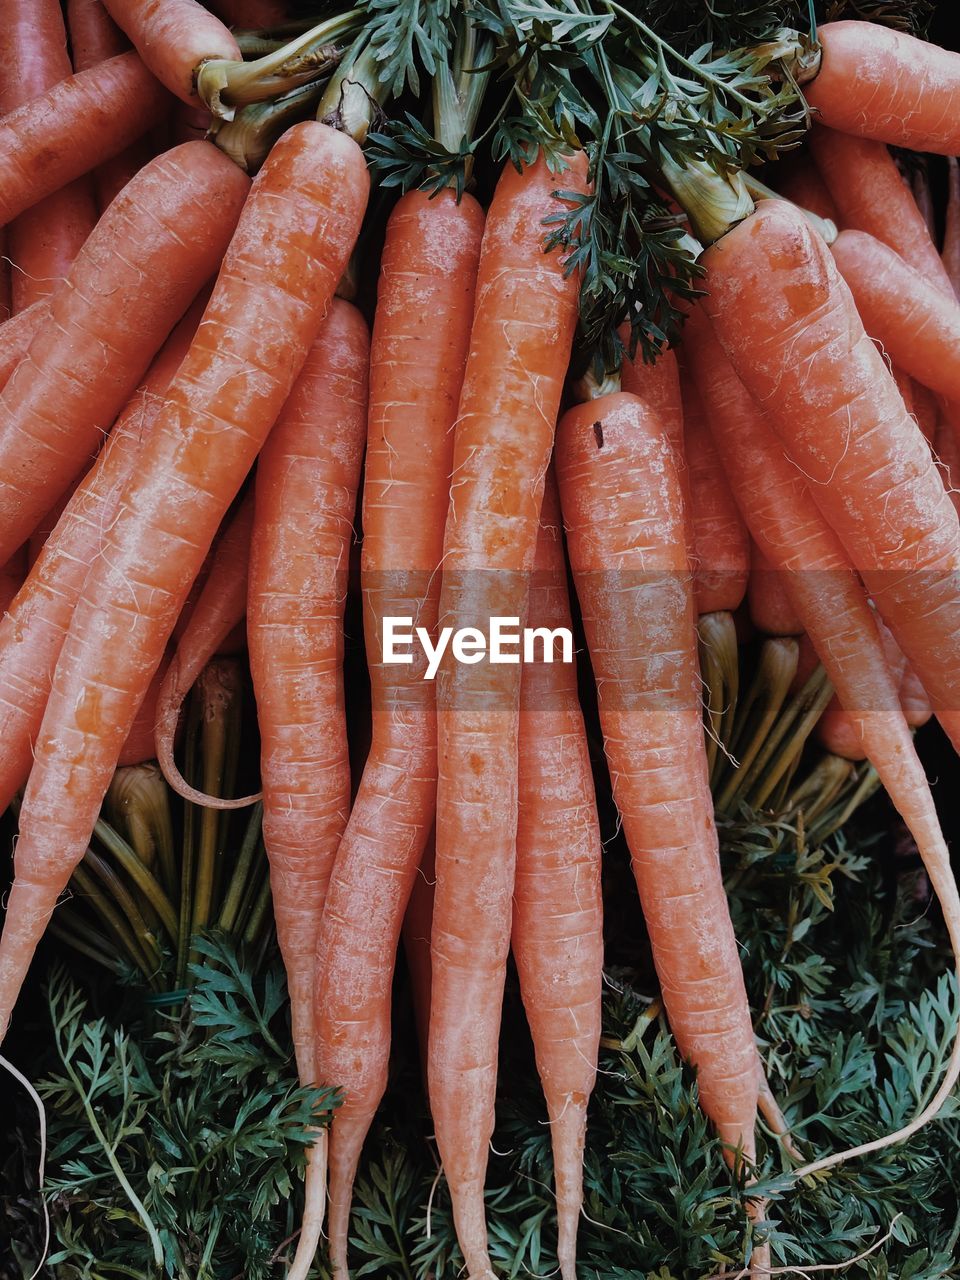 carrot, food, food and drink, root vegetable, healthy eating, freshness, vegetable, wellbeing, produce, organic, no people, orange color, high angle view, large group of objects, market, raw food, day, baby carrot, abundance, retail, close-up, bunch, outdoors, plant, still life